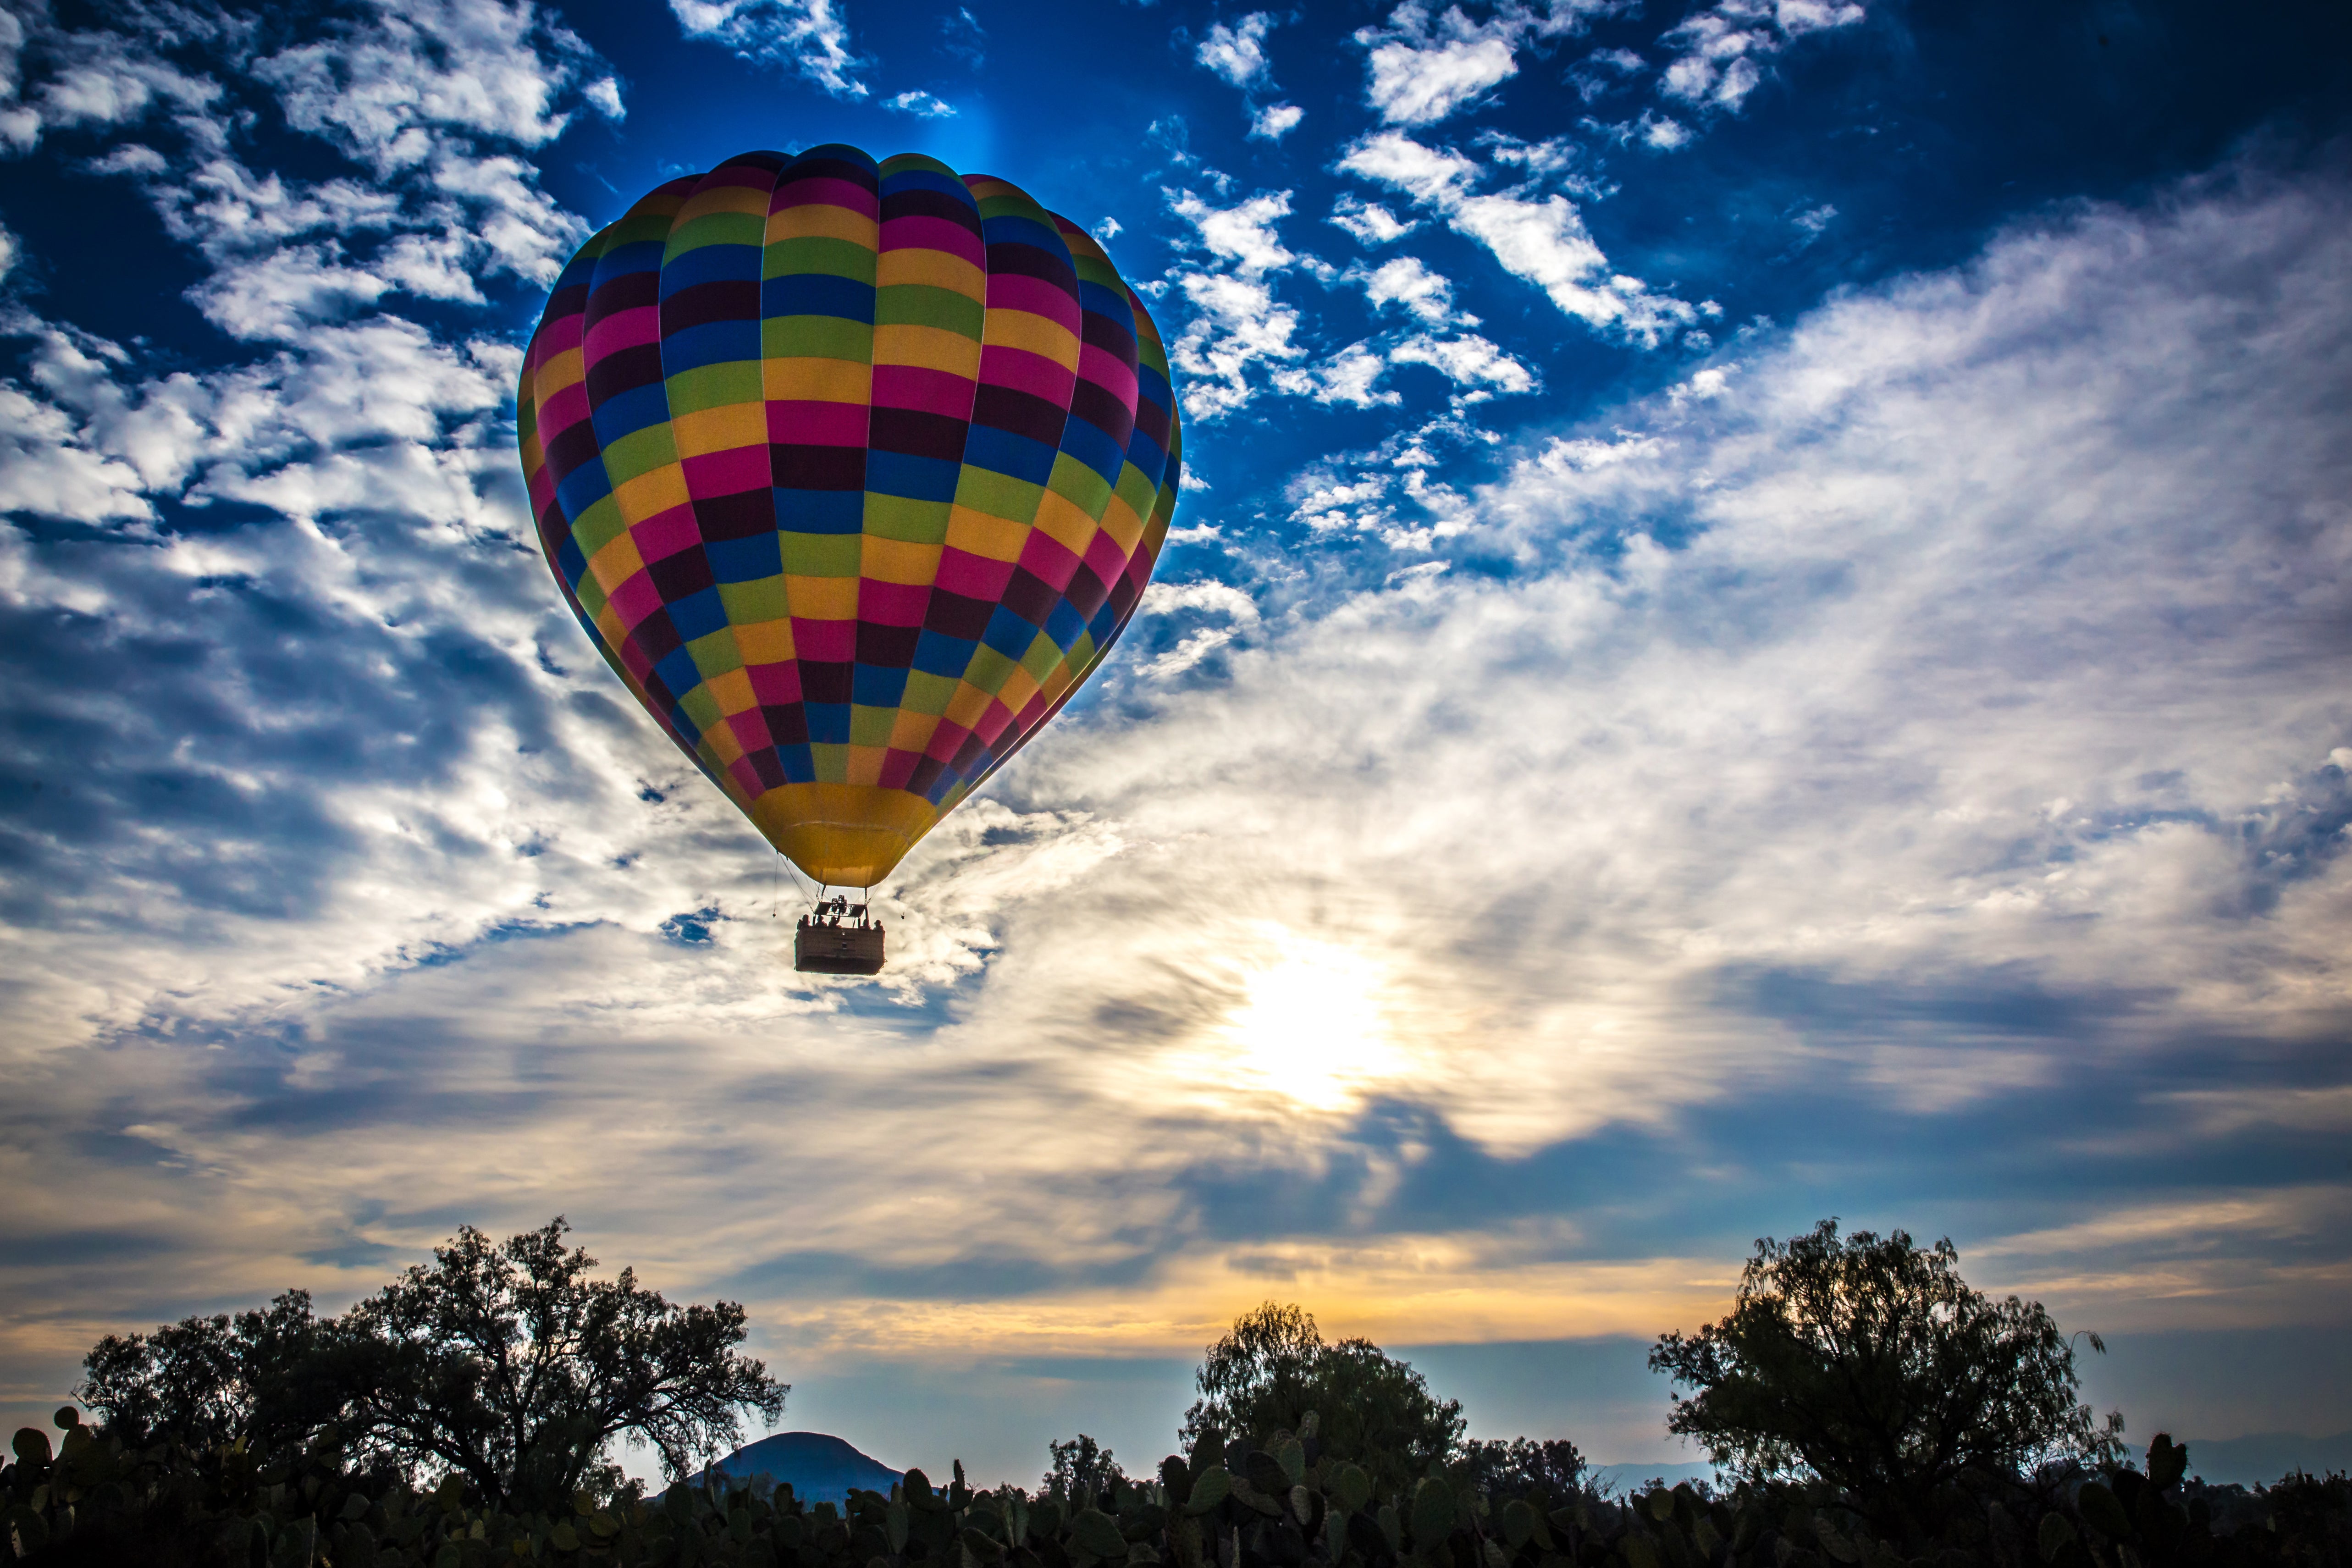 I Went To The Biggest Balloon Fiesta In the World, And It Was Lit
